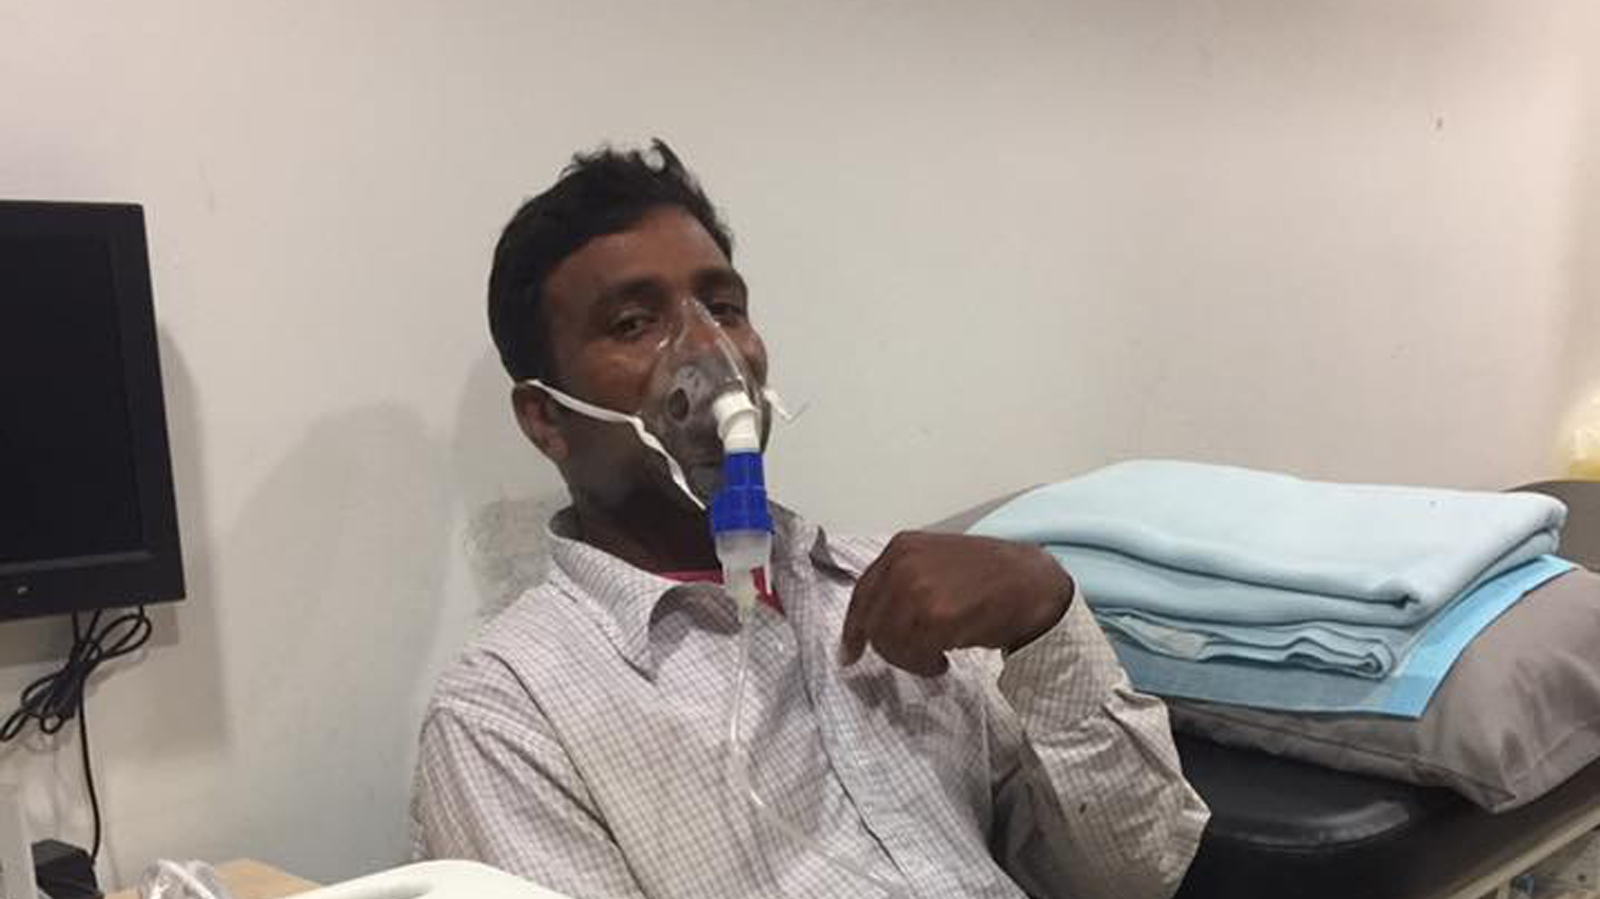 Clinic staff and patient help migrant worker who suffered an asthma attack